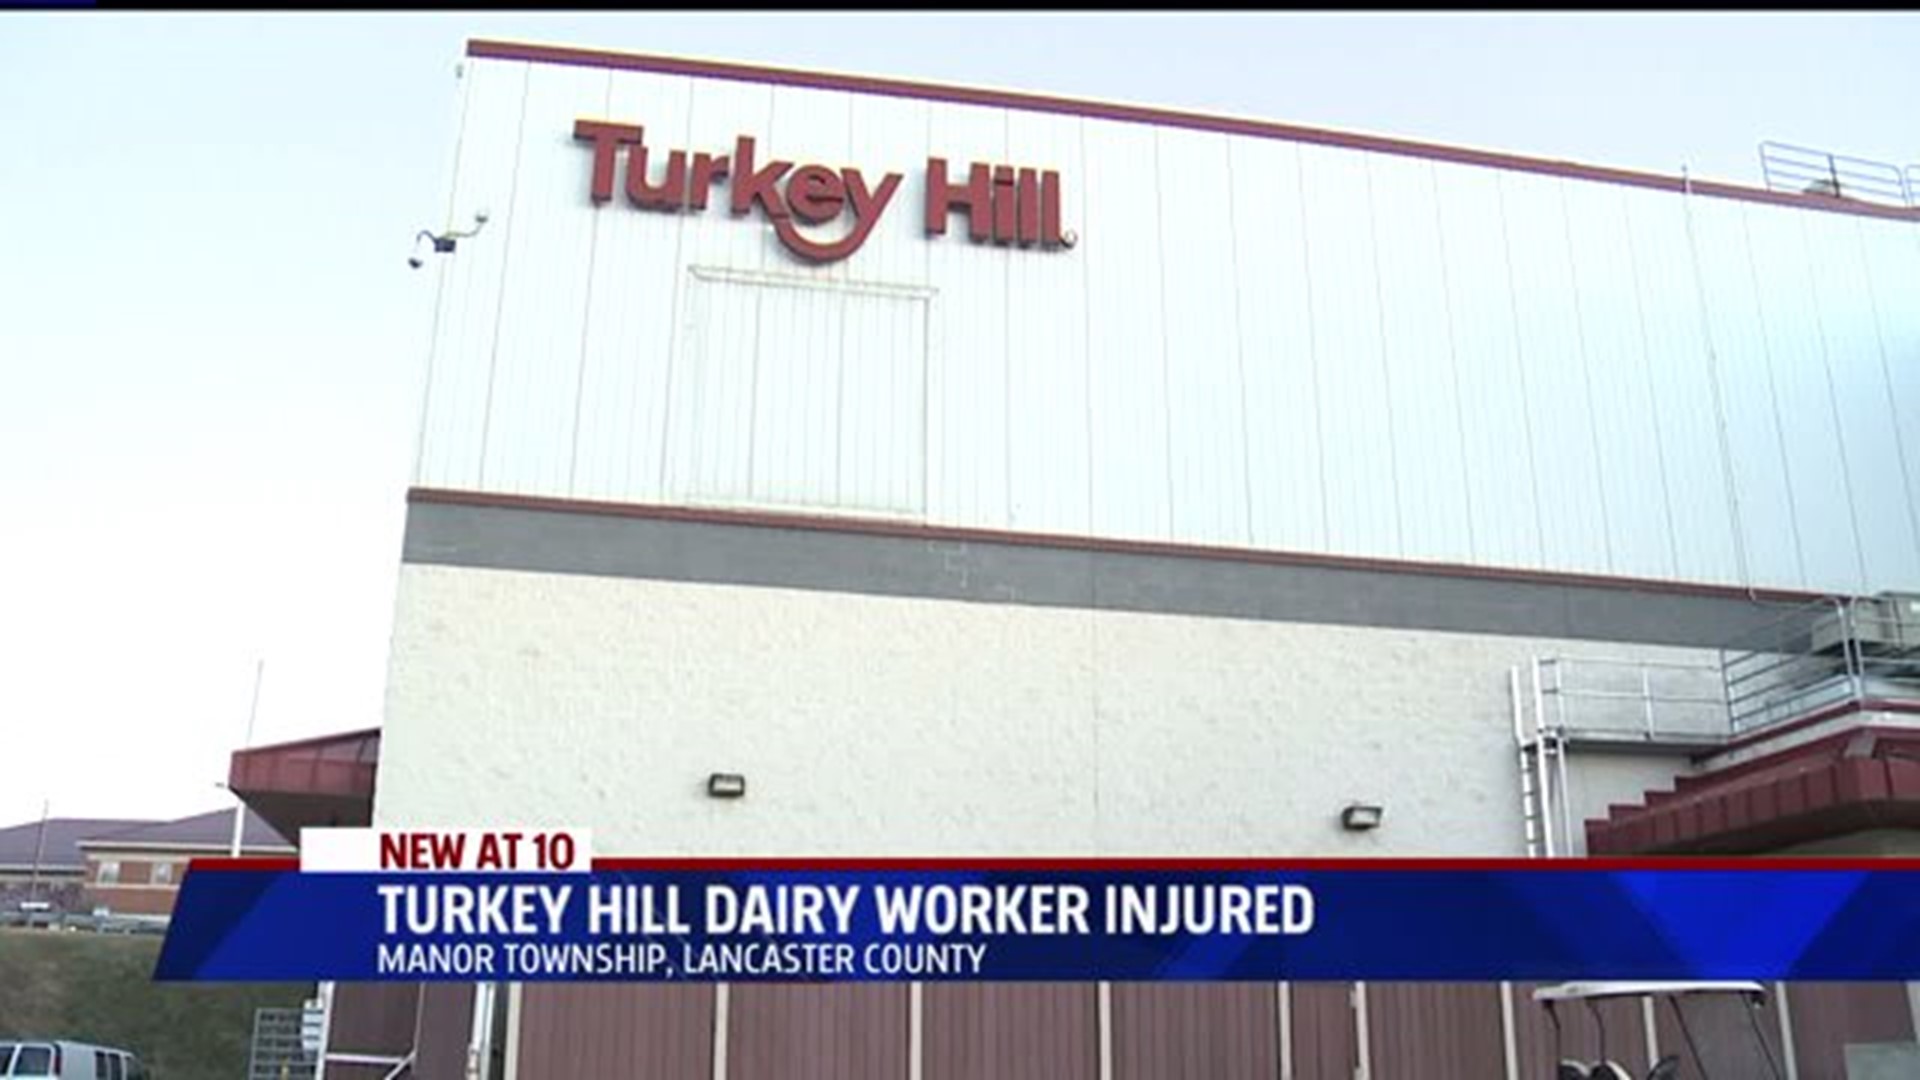 Worker at Turkey Hill Dairy Facility Injured